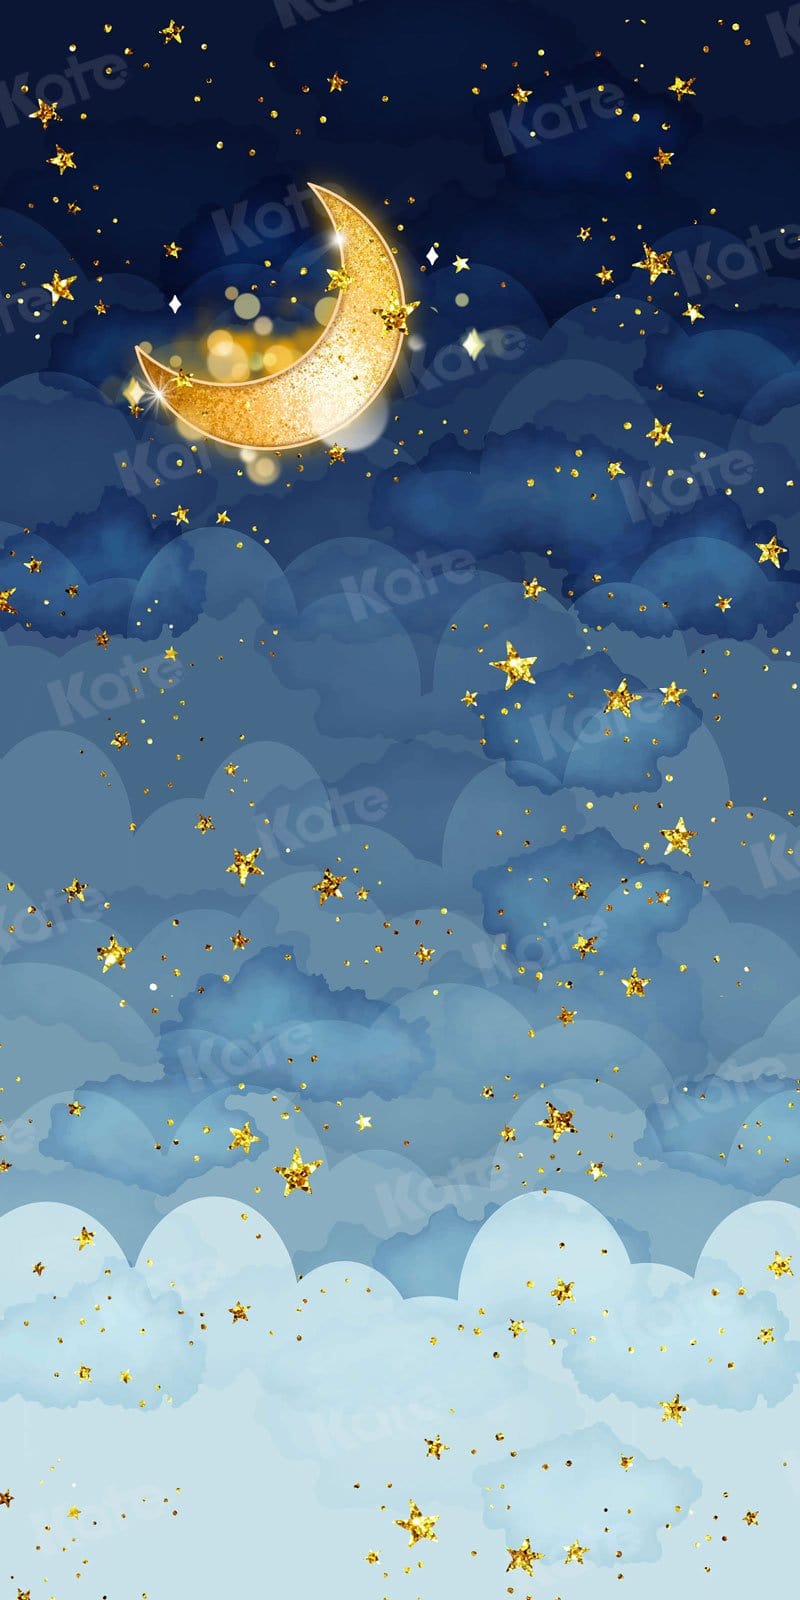 Kate Cake Smash Dream Night with Cloud Moon Backdrop for Photography